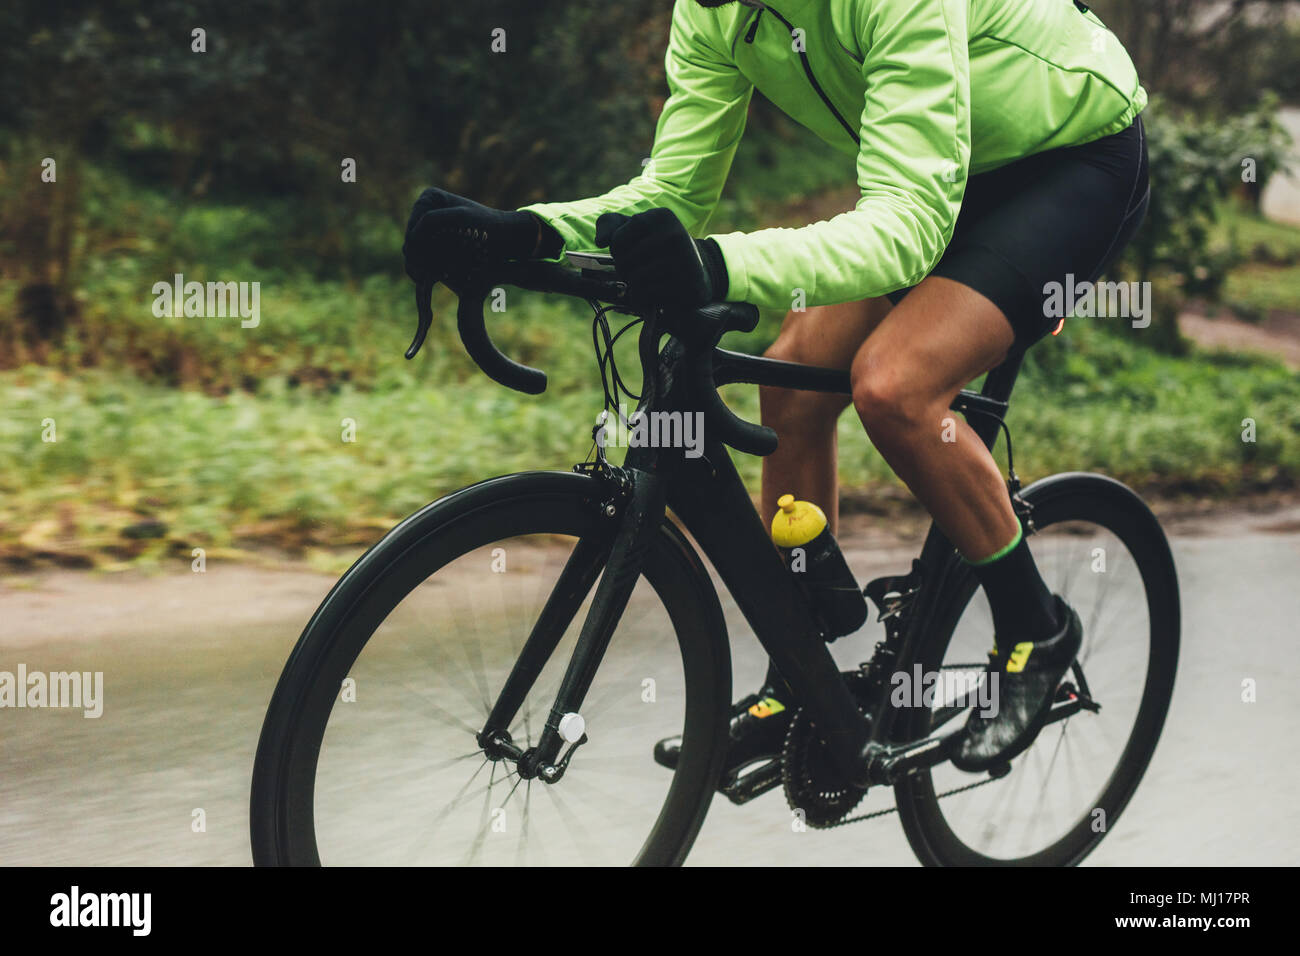 Professional cyclist riding bike outdoors. Male athlete in cycling gear practising on wet road. Cropped shot. Stock Photo